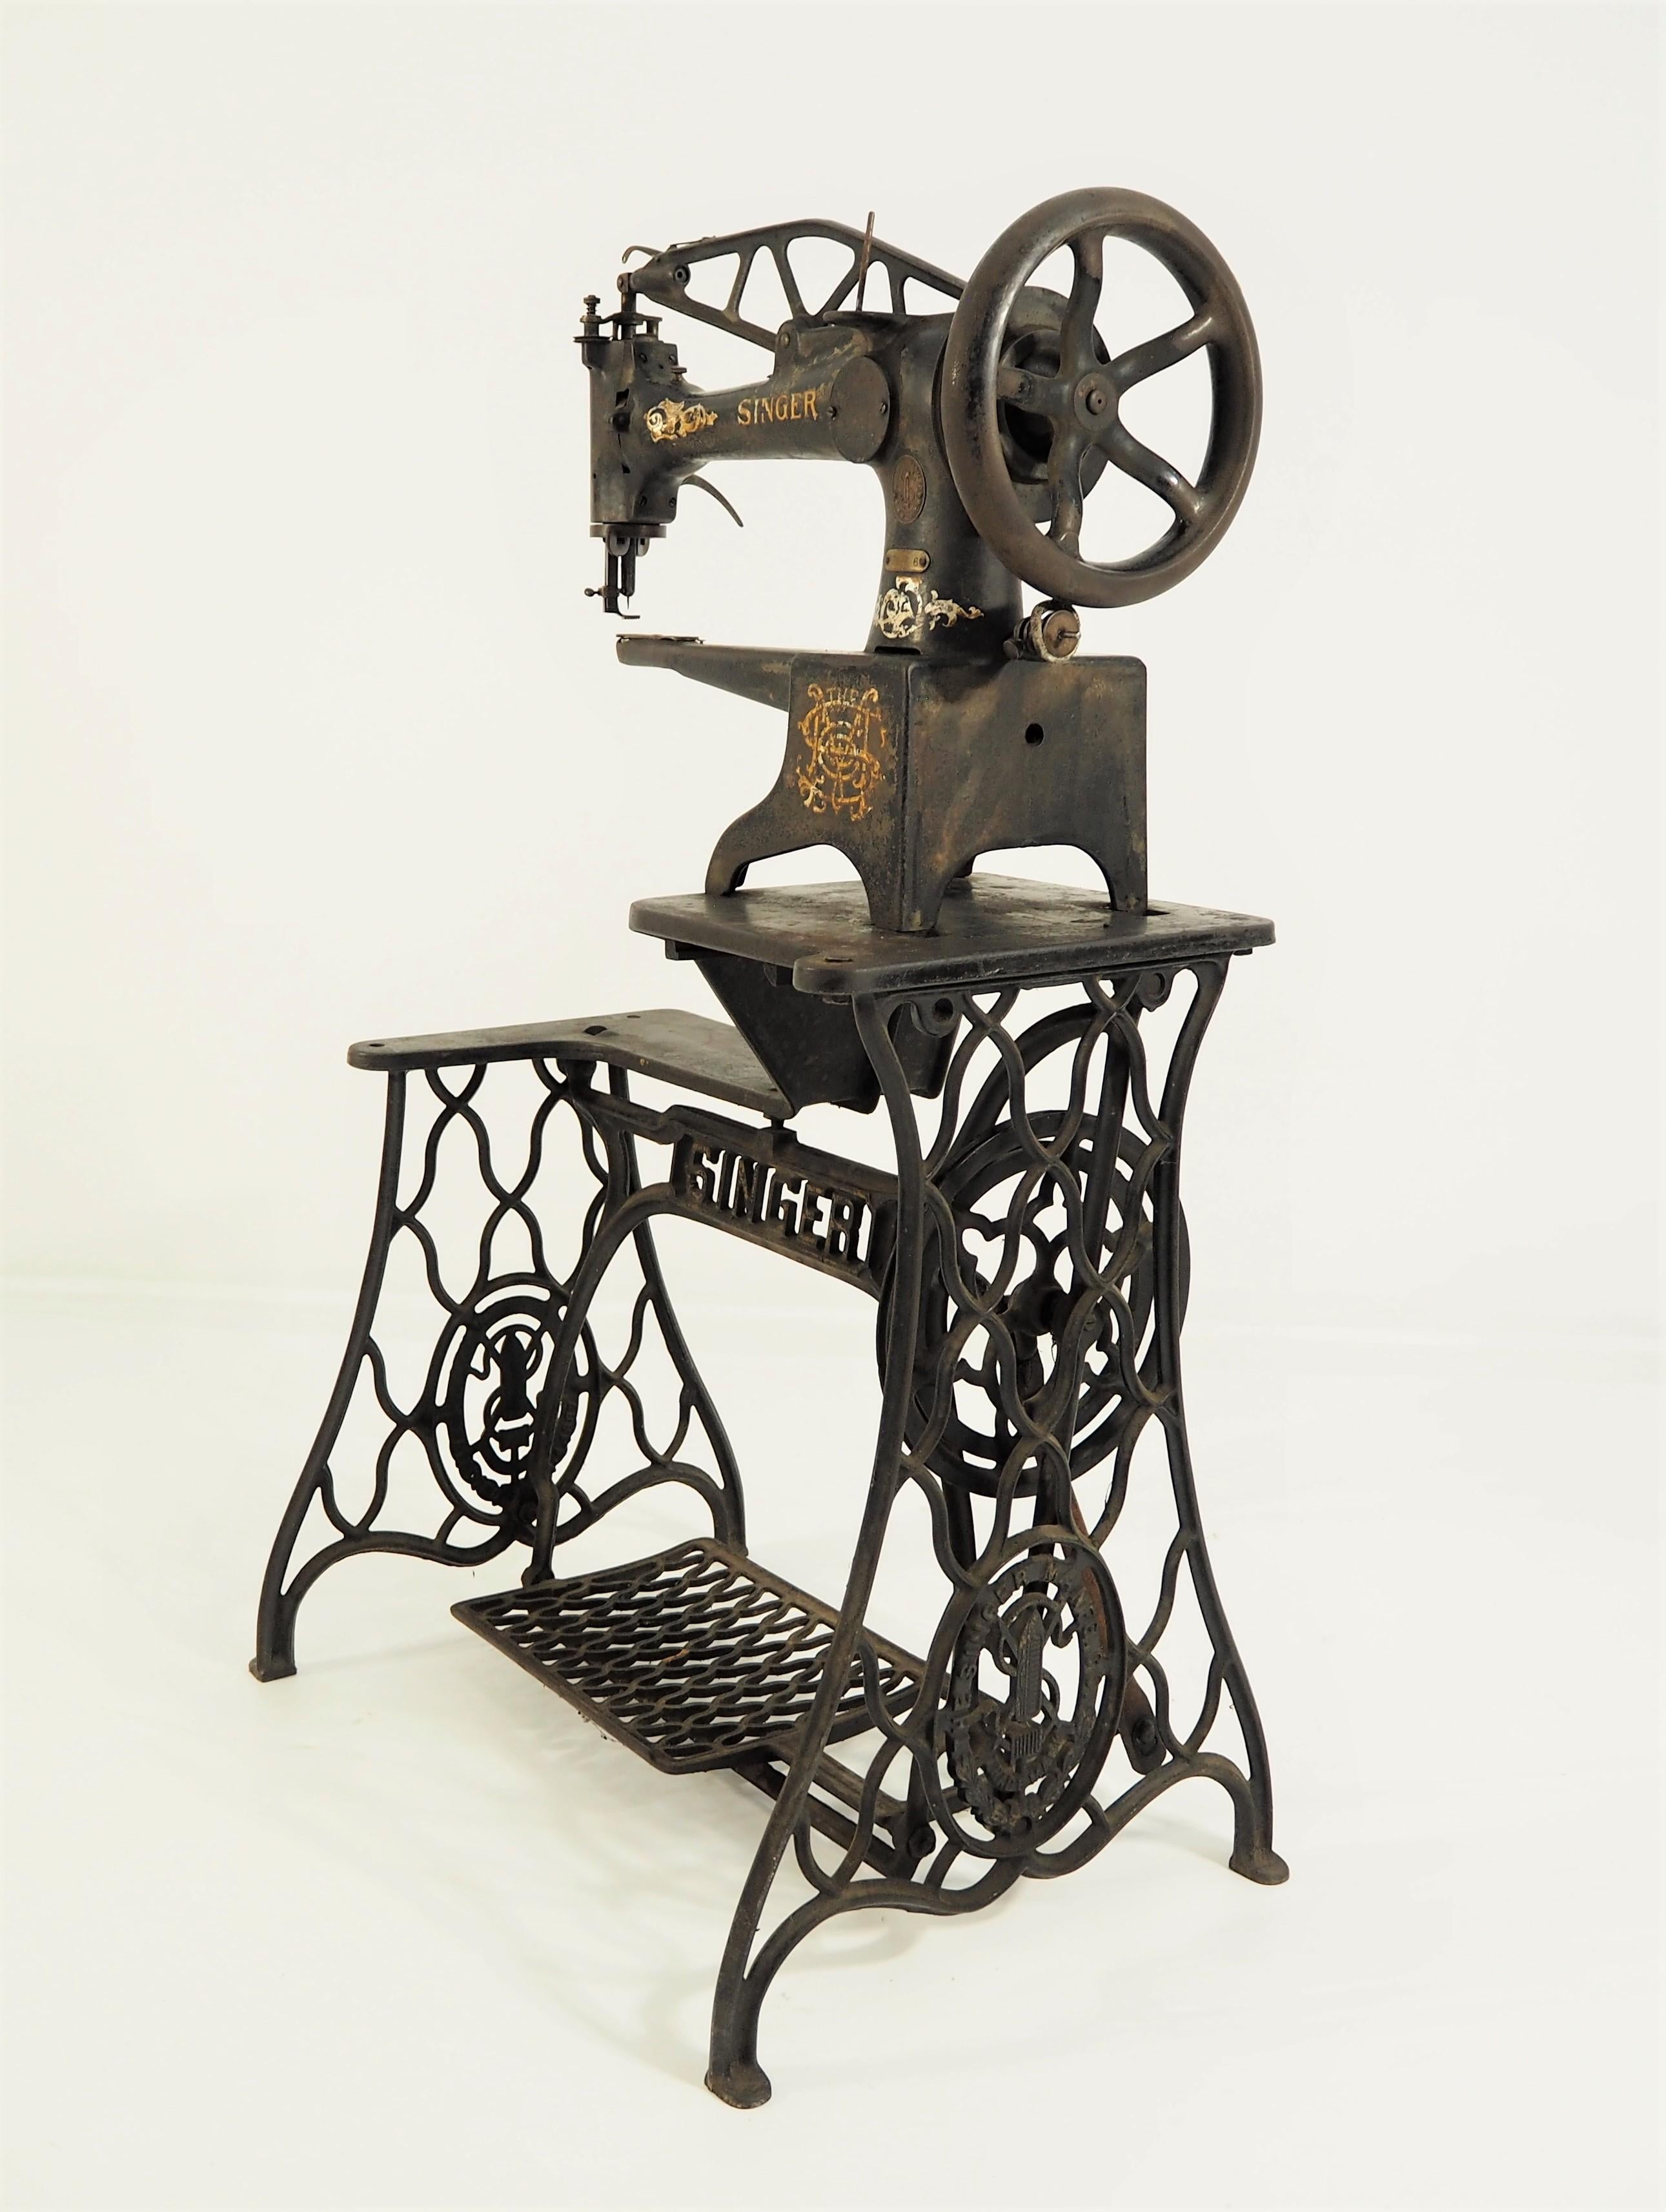 Sewing Machine from Singer, circa 1920s 1